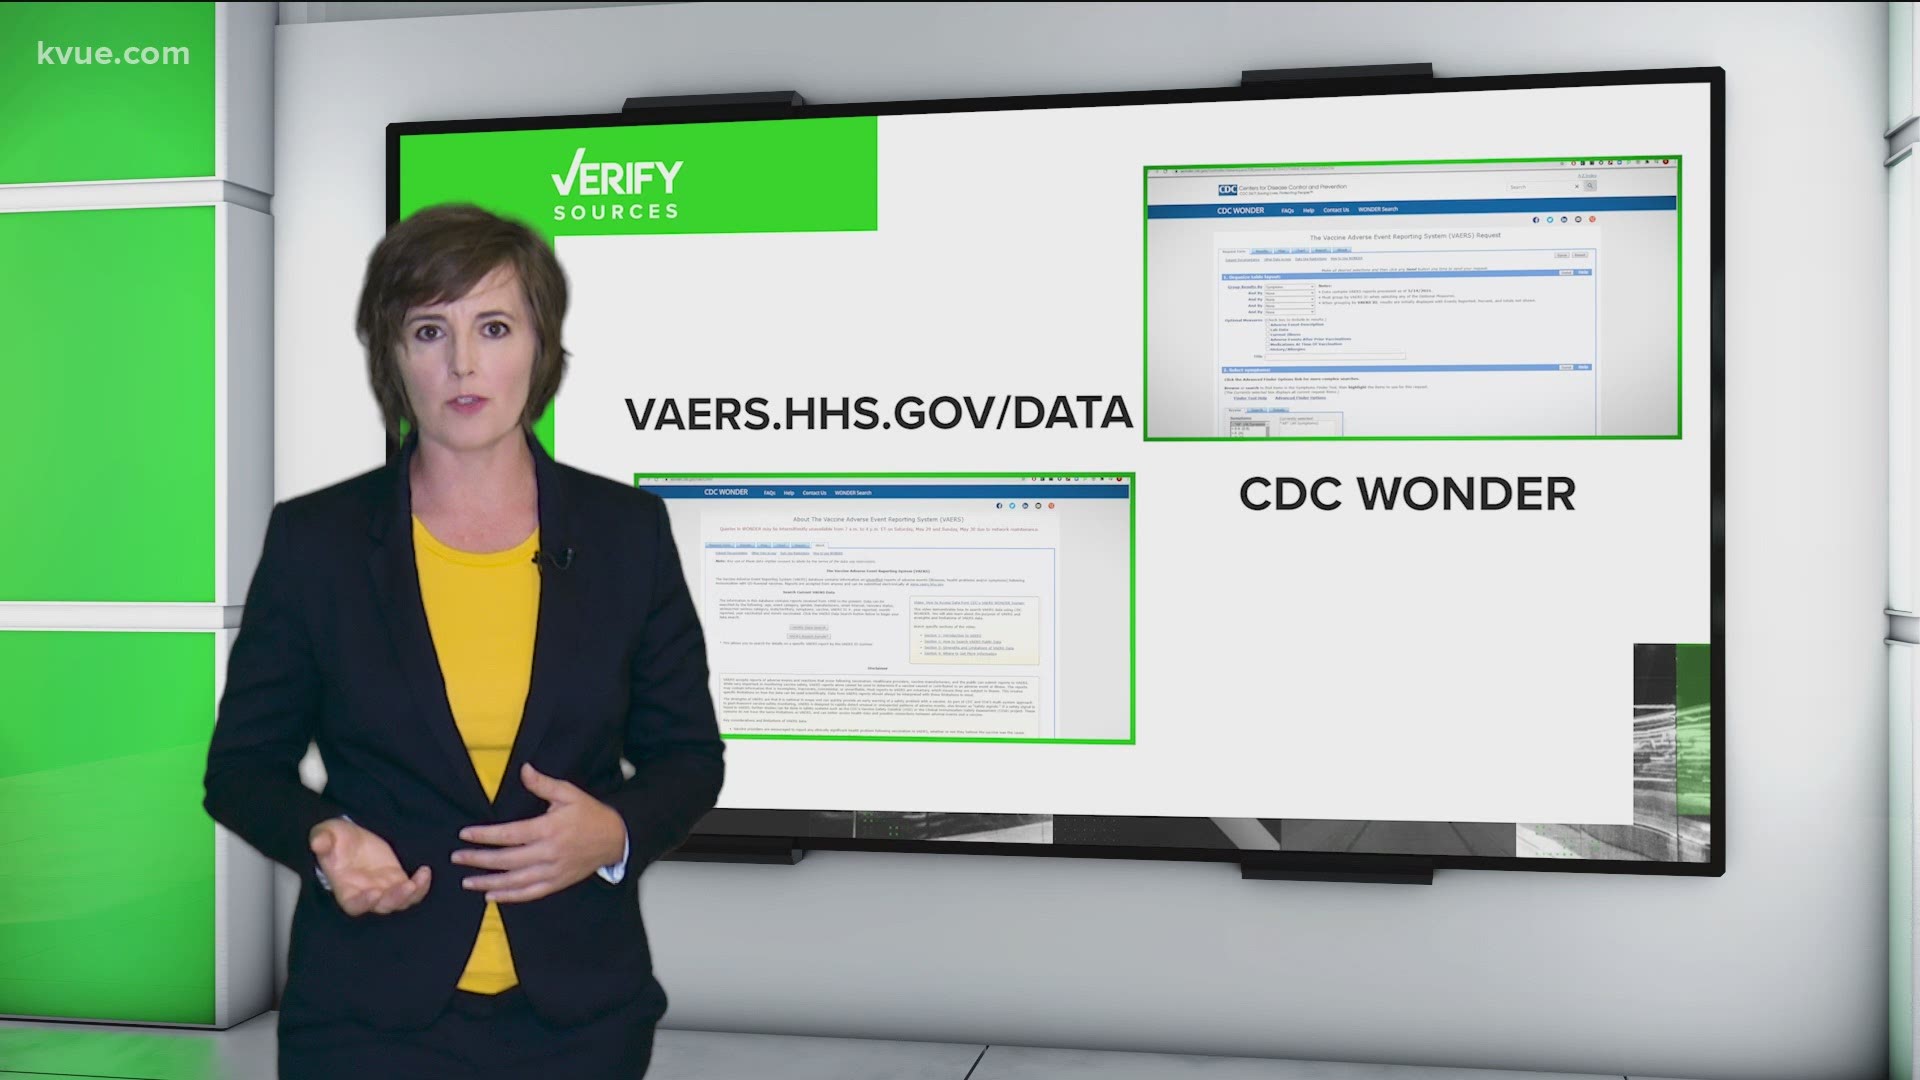 An Instagram post has parents concerned about the safety of the COVID-19 vaccine for children. KVUE's Investigative Reporter Erica Proffer is here with your Verify.